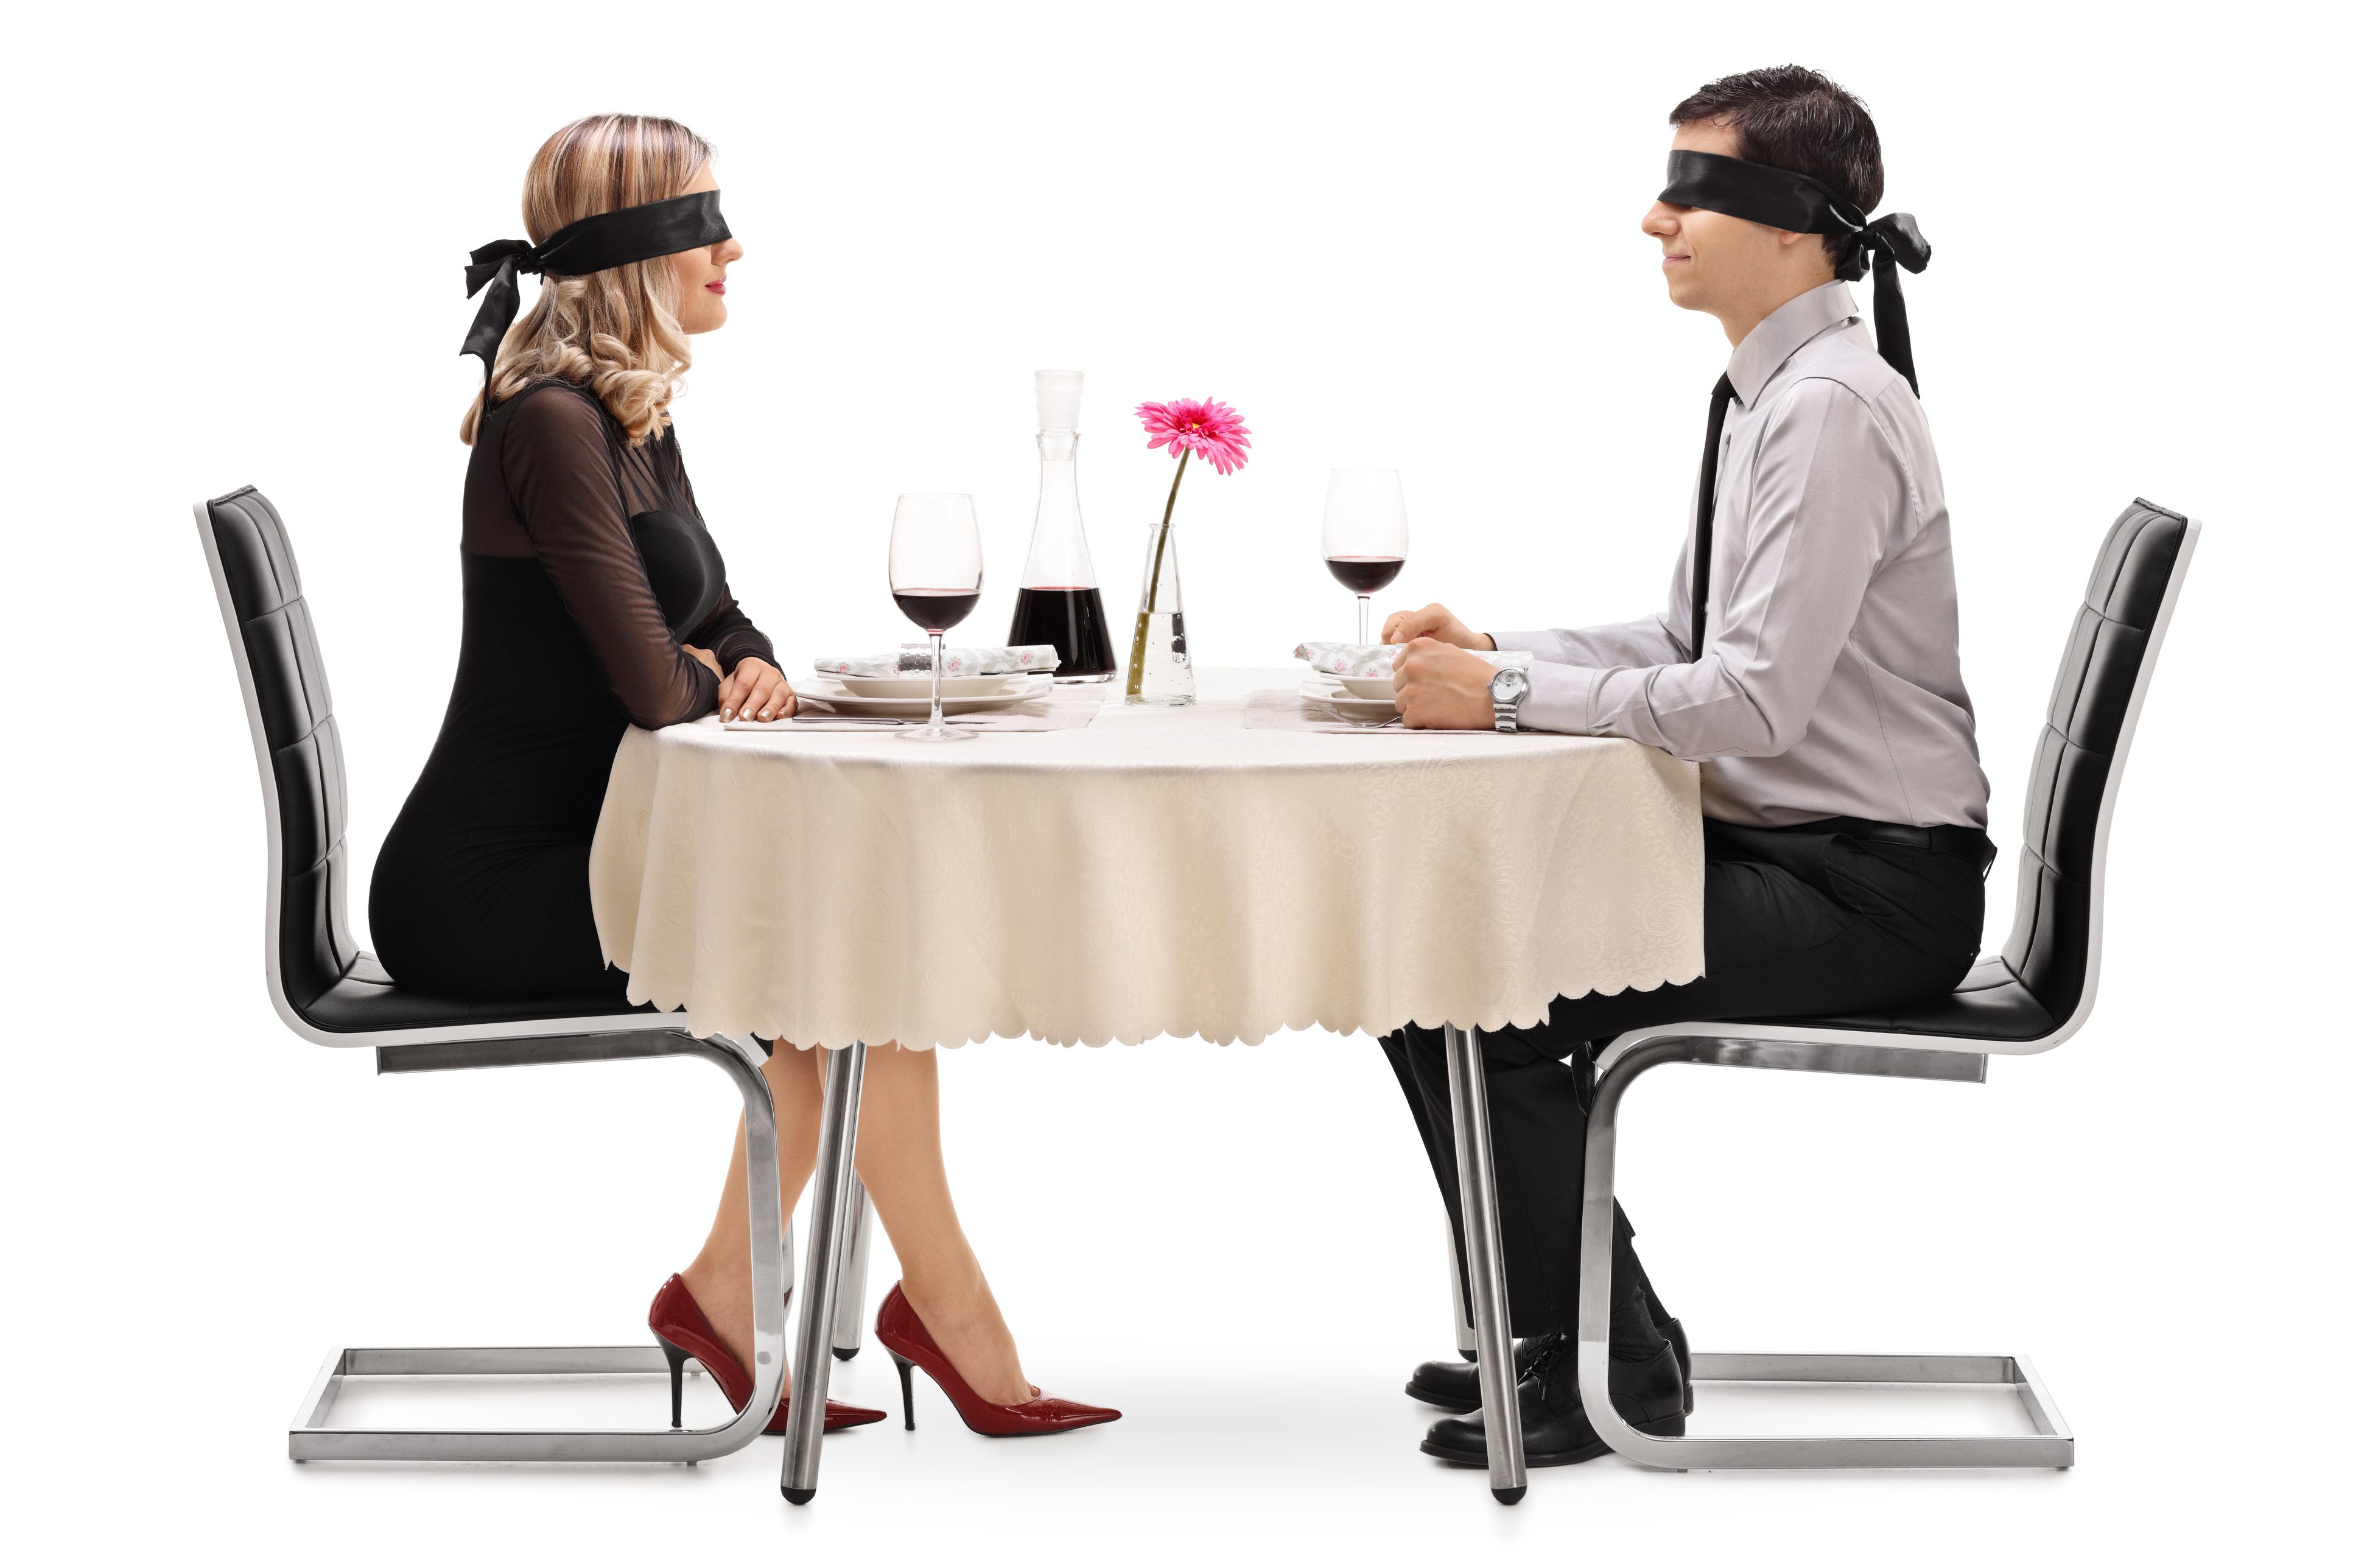 Blind Dates vs Online Dating. Which Is Better?